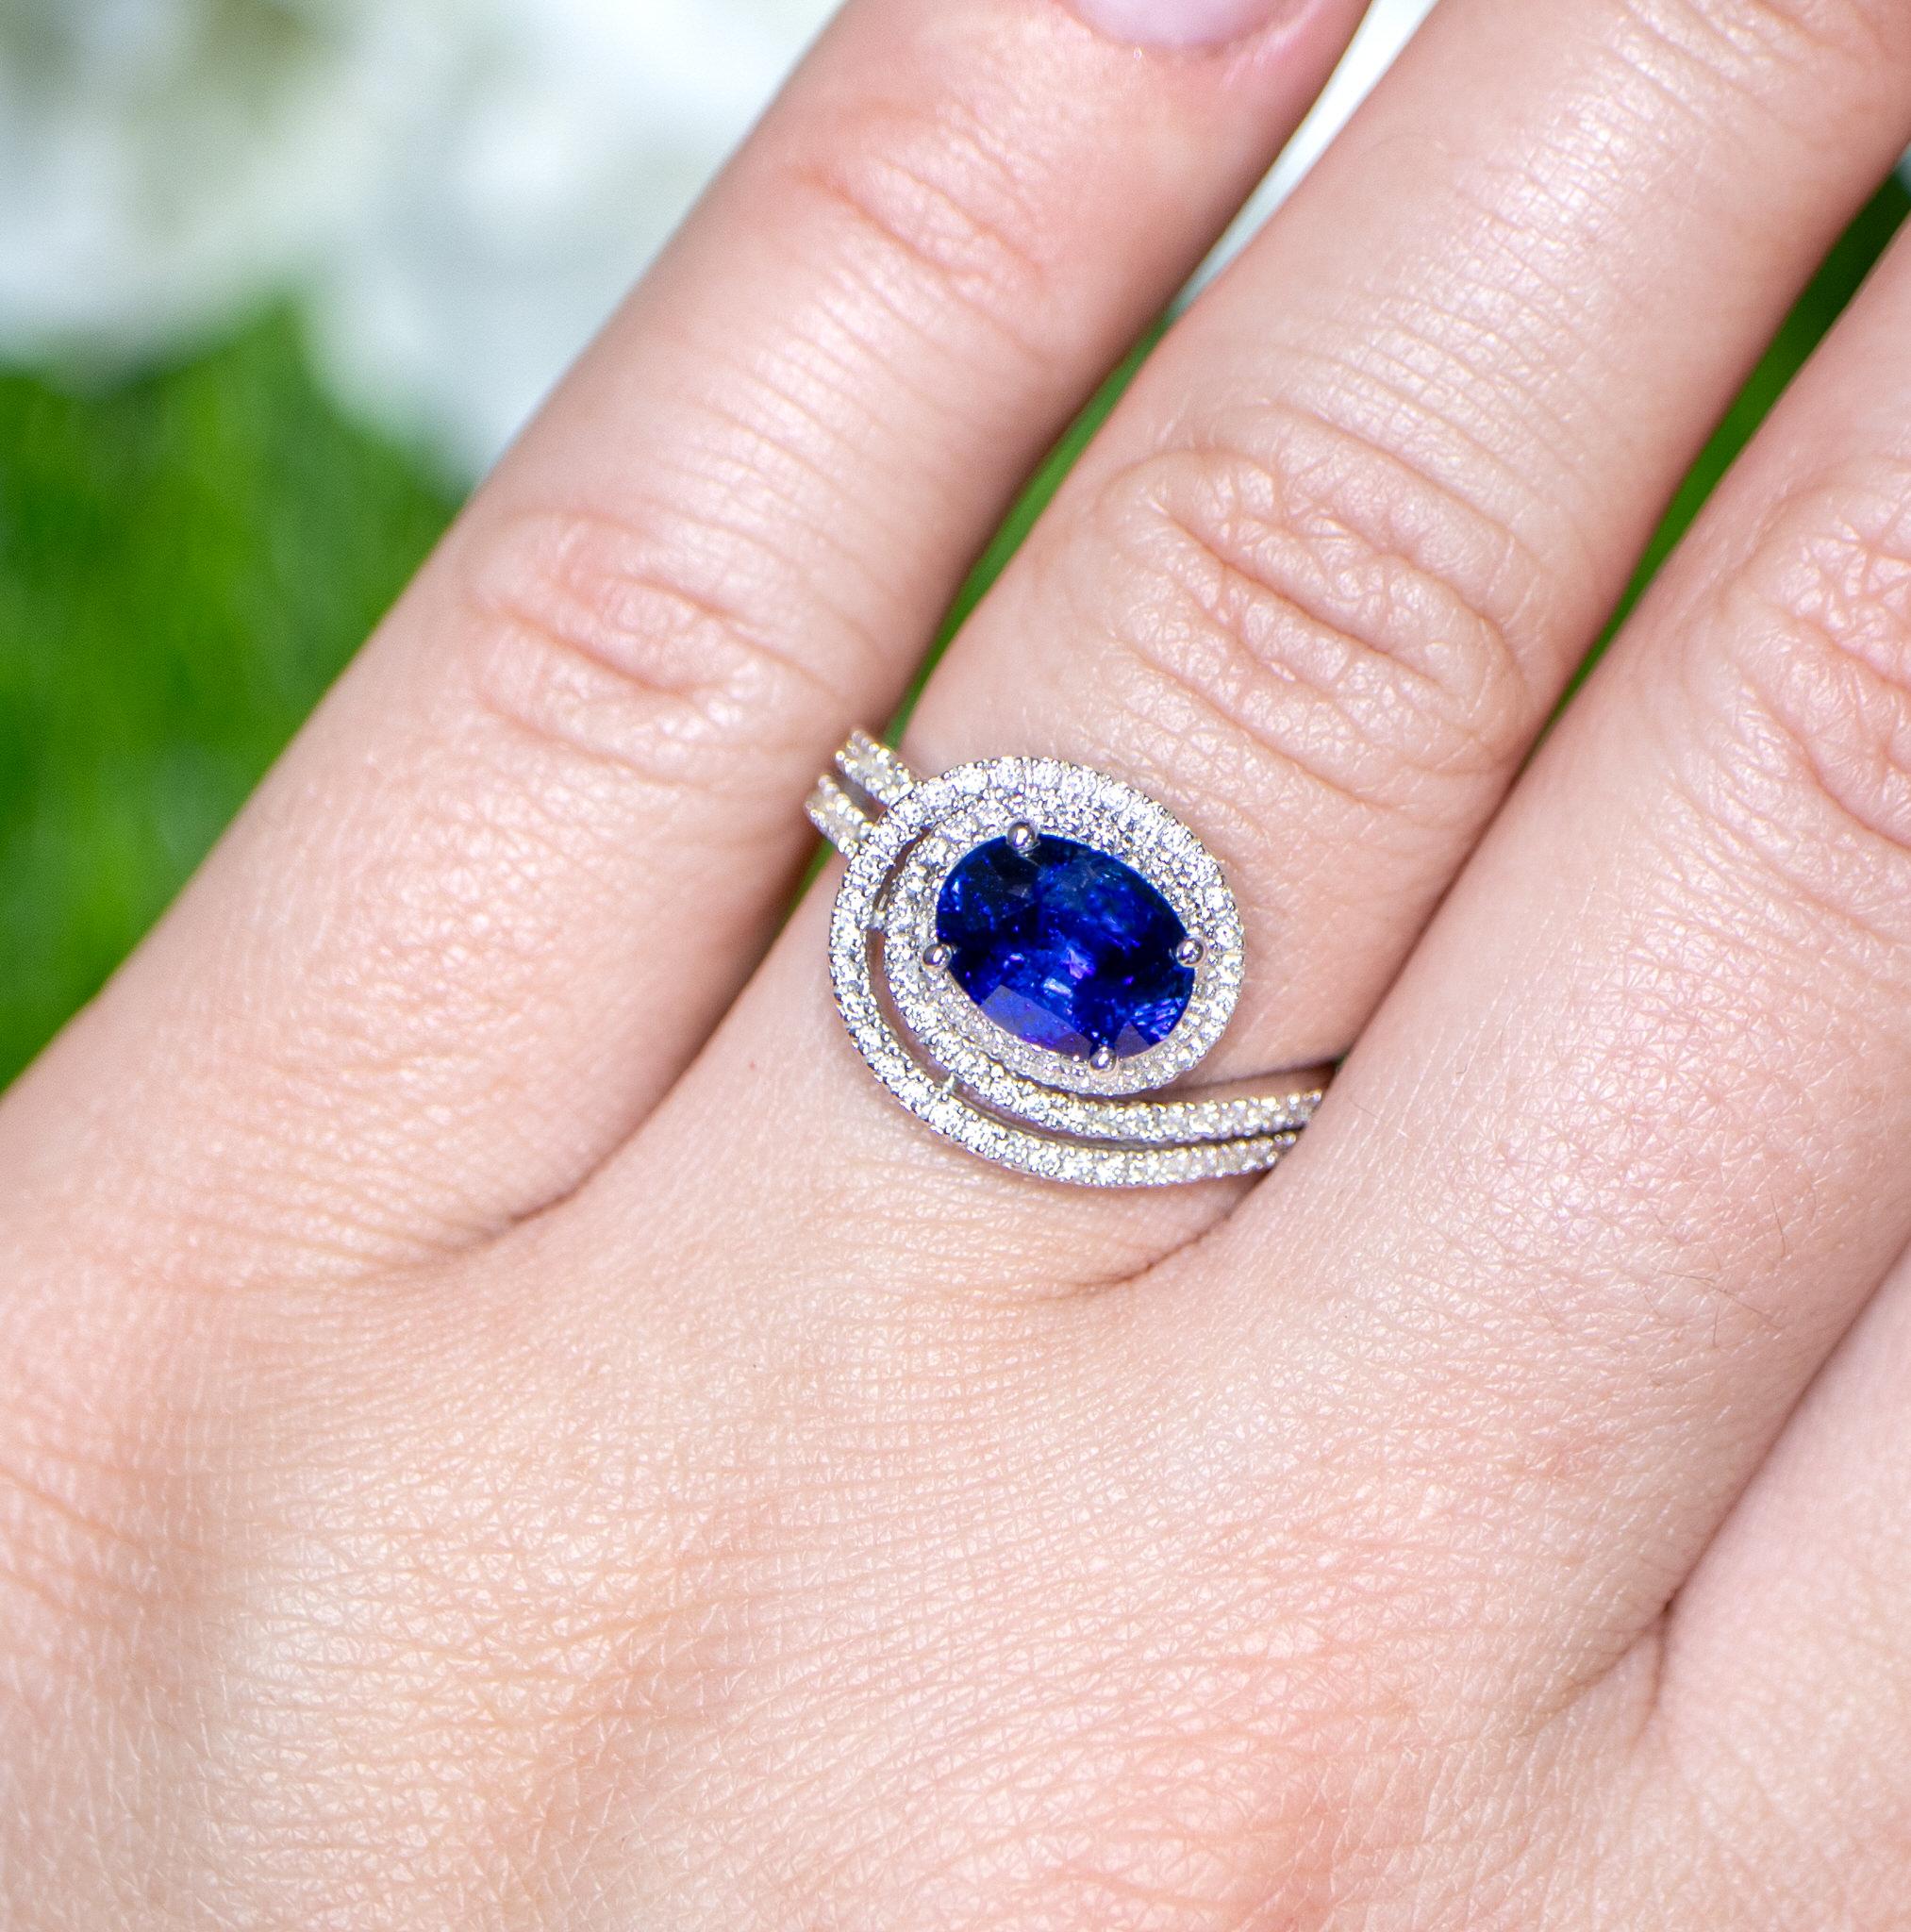 It comes with the Gemological Appraisal by GIA GG/AJP
All Gemstones are Natural
Blue Sapphire = 2.08 Carats
Diamonds = 0.32 Carats
Metal: 18K White Gold
Ring Size: 6.5* US
*It can be resized complimentary